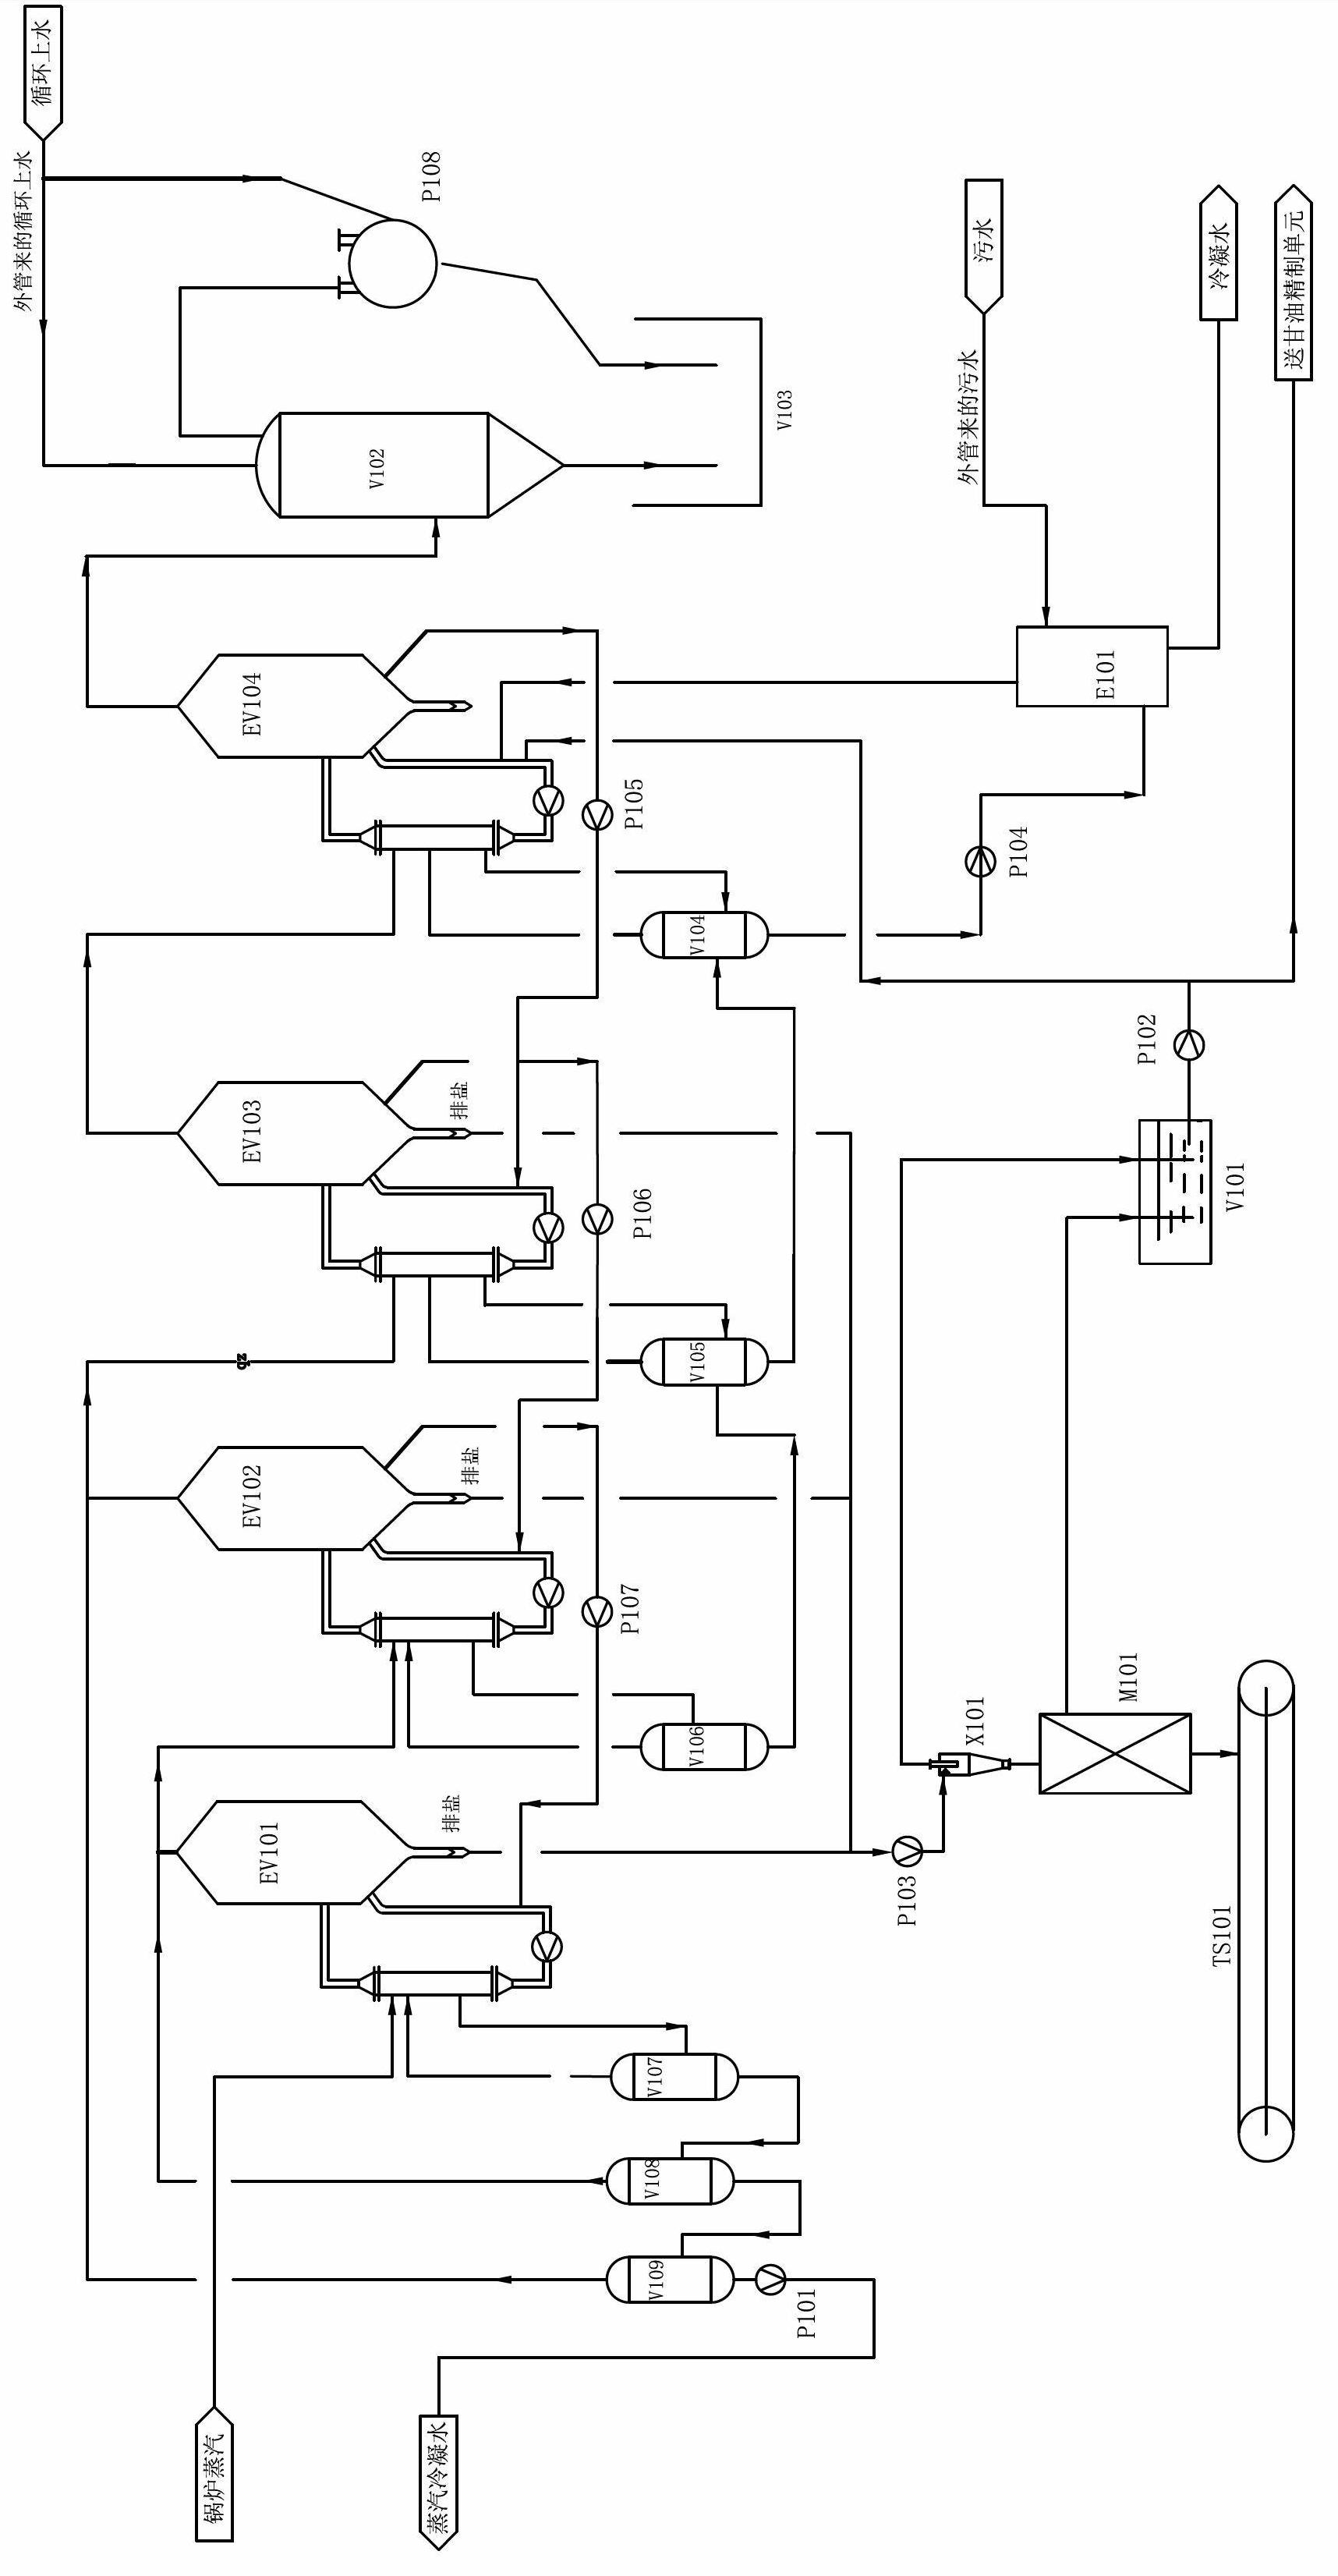 Method for processing wastewater from production of epoxy chloropropane by using glycerol as material